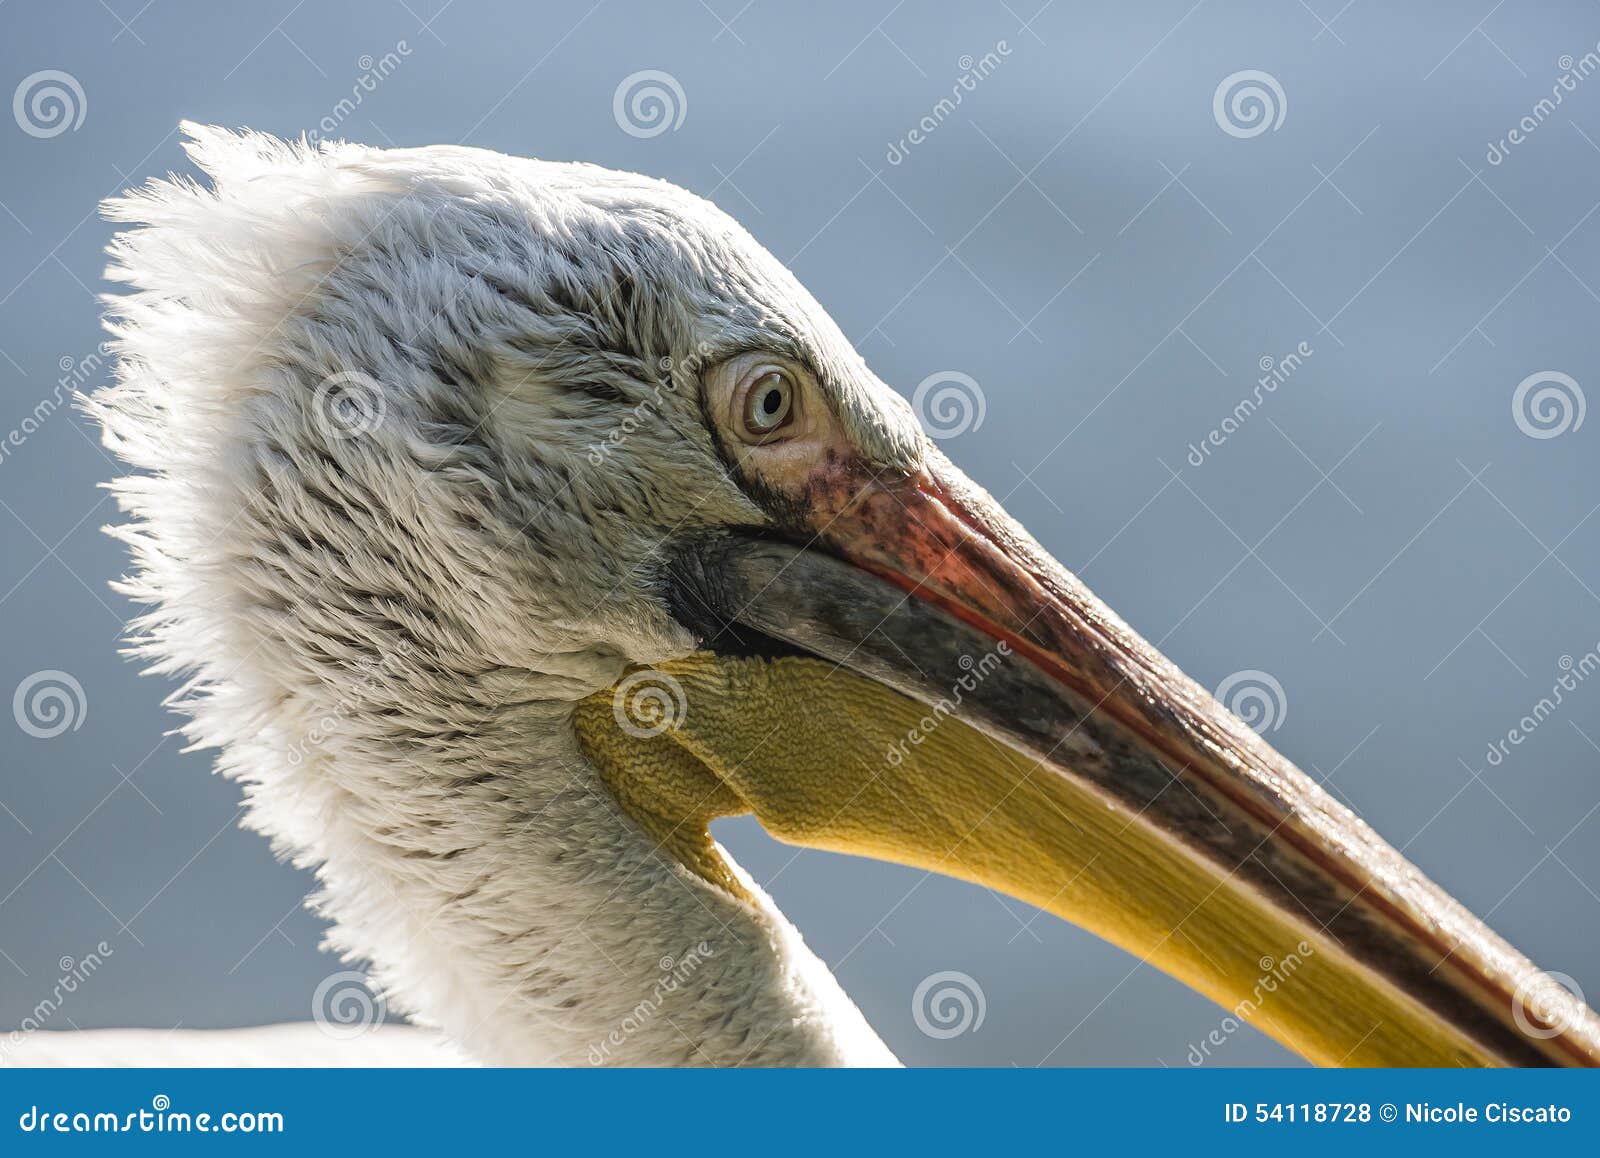 detail of a pelican